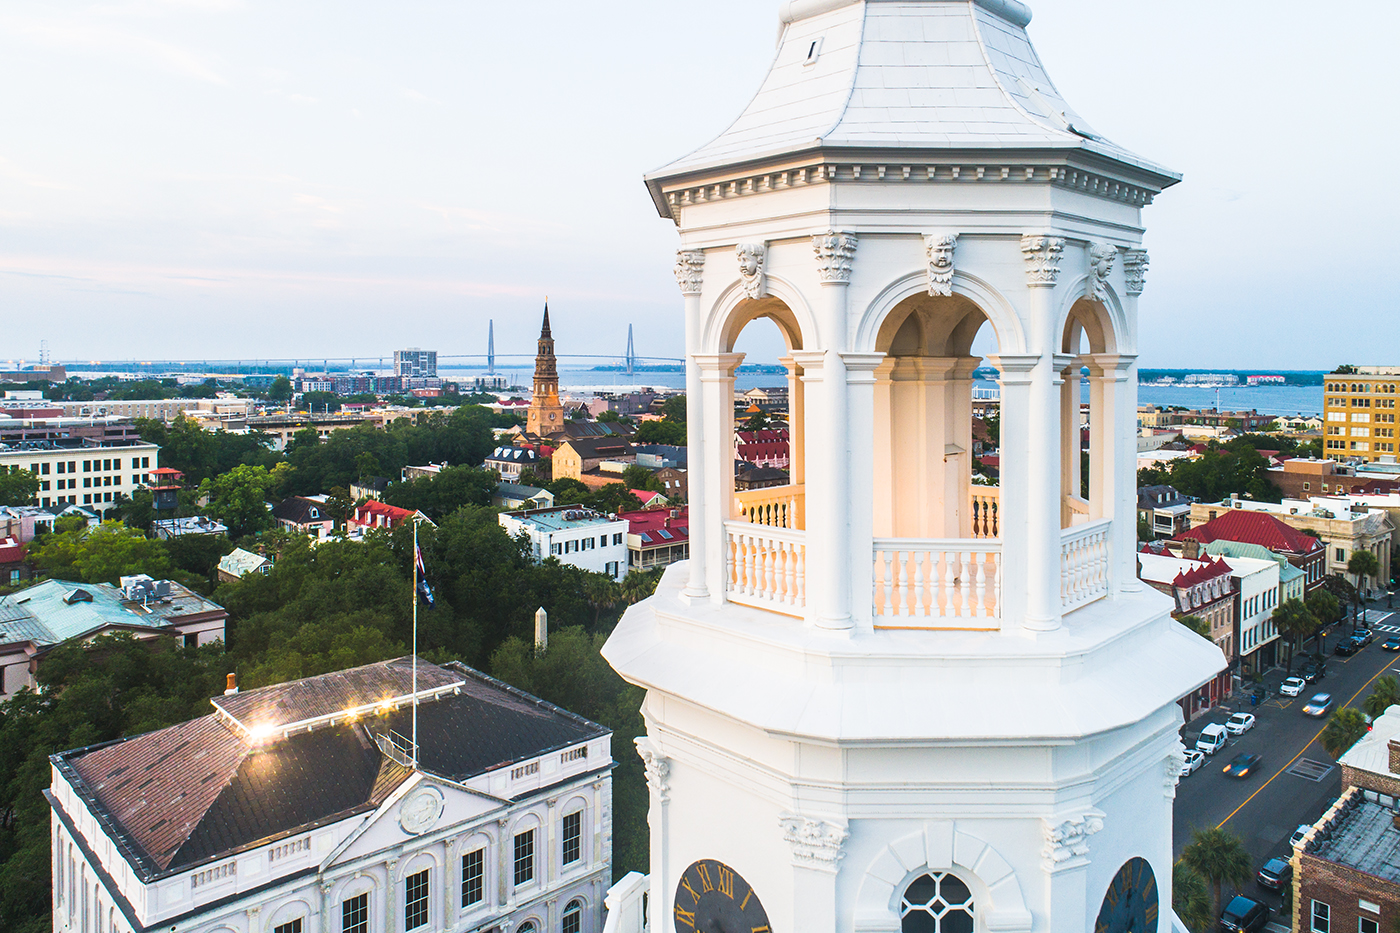 Learn the history behind the Holy City's church steeples, Charleston SC